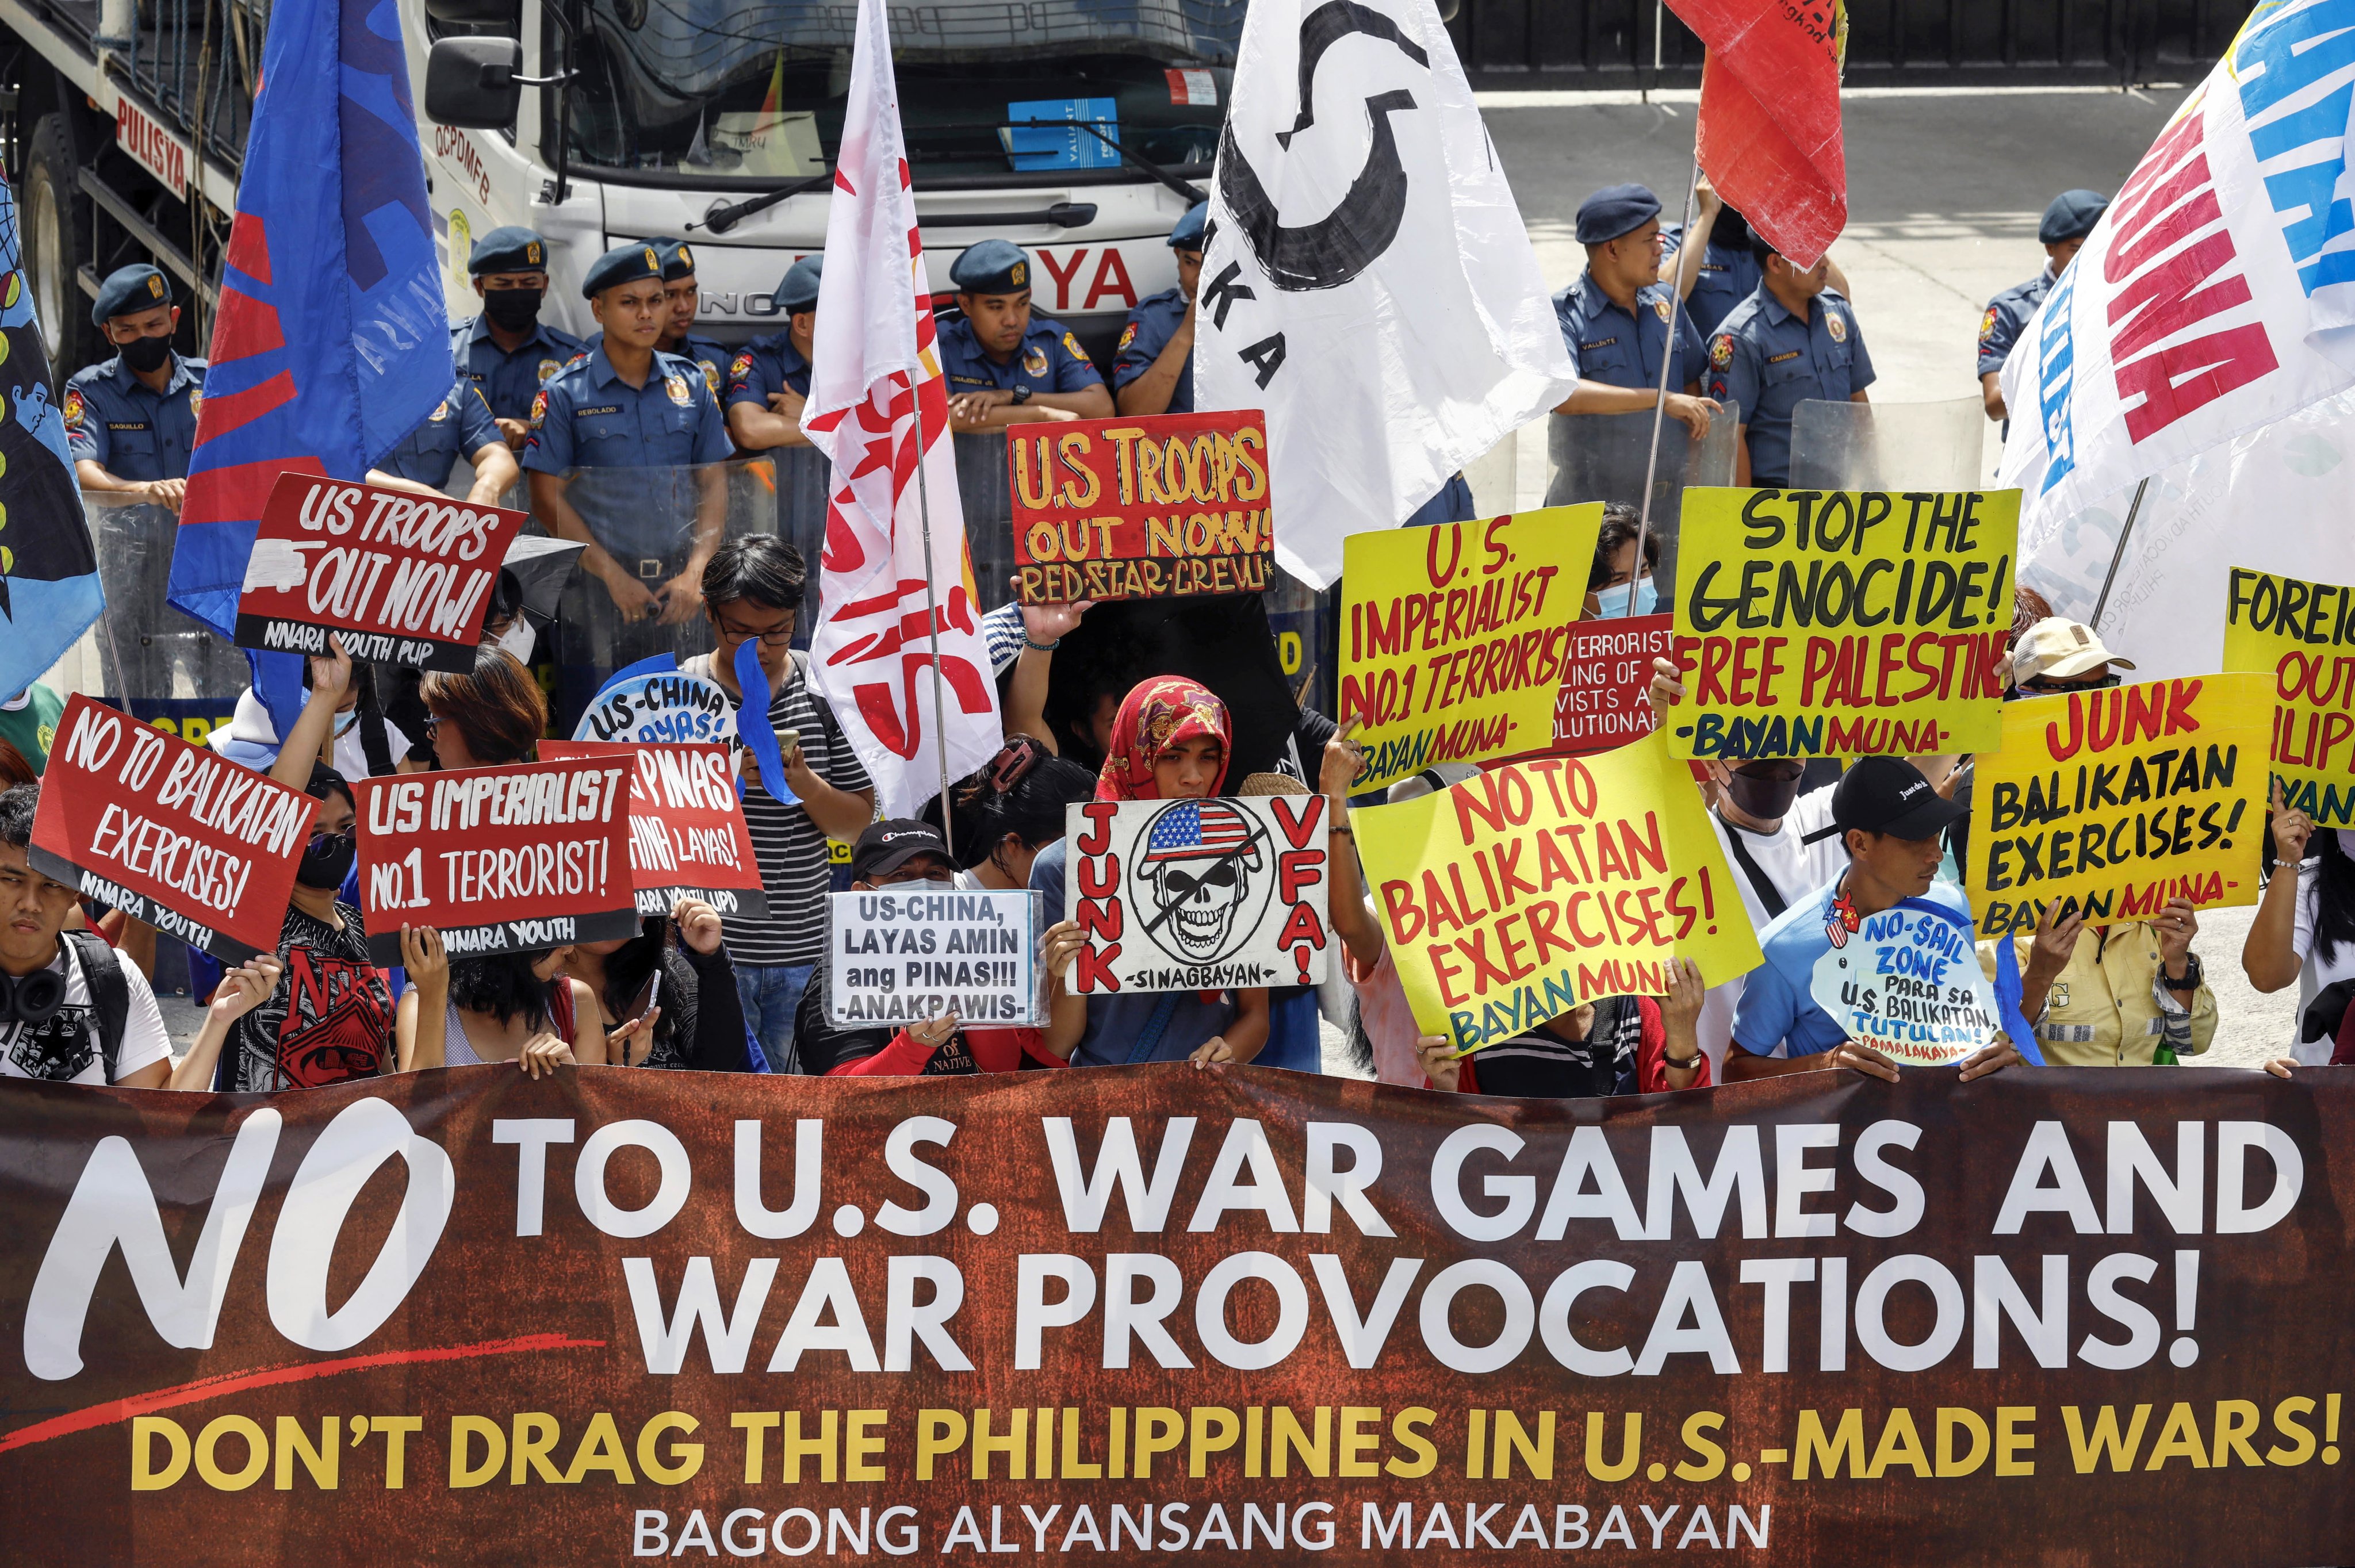 Protesters opposed to US-Philippines military exercises hold a rally outside the headquarters of the Armed Forces of the Philippines in Quezon City on May 10. Photo: EPA-EFE